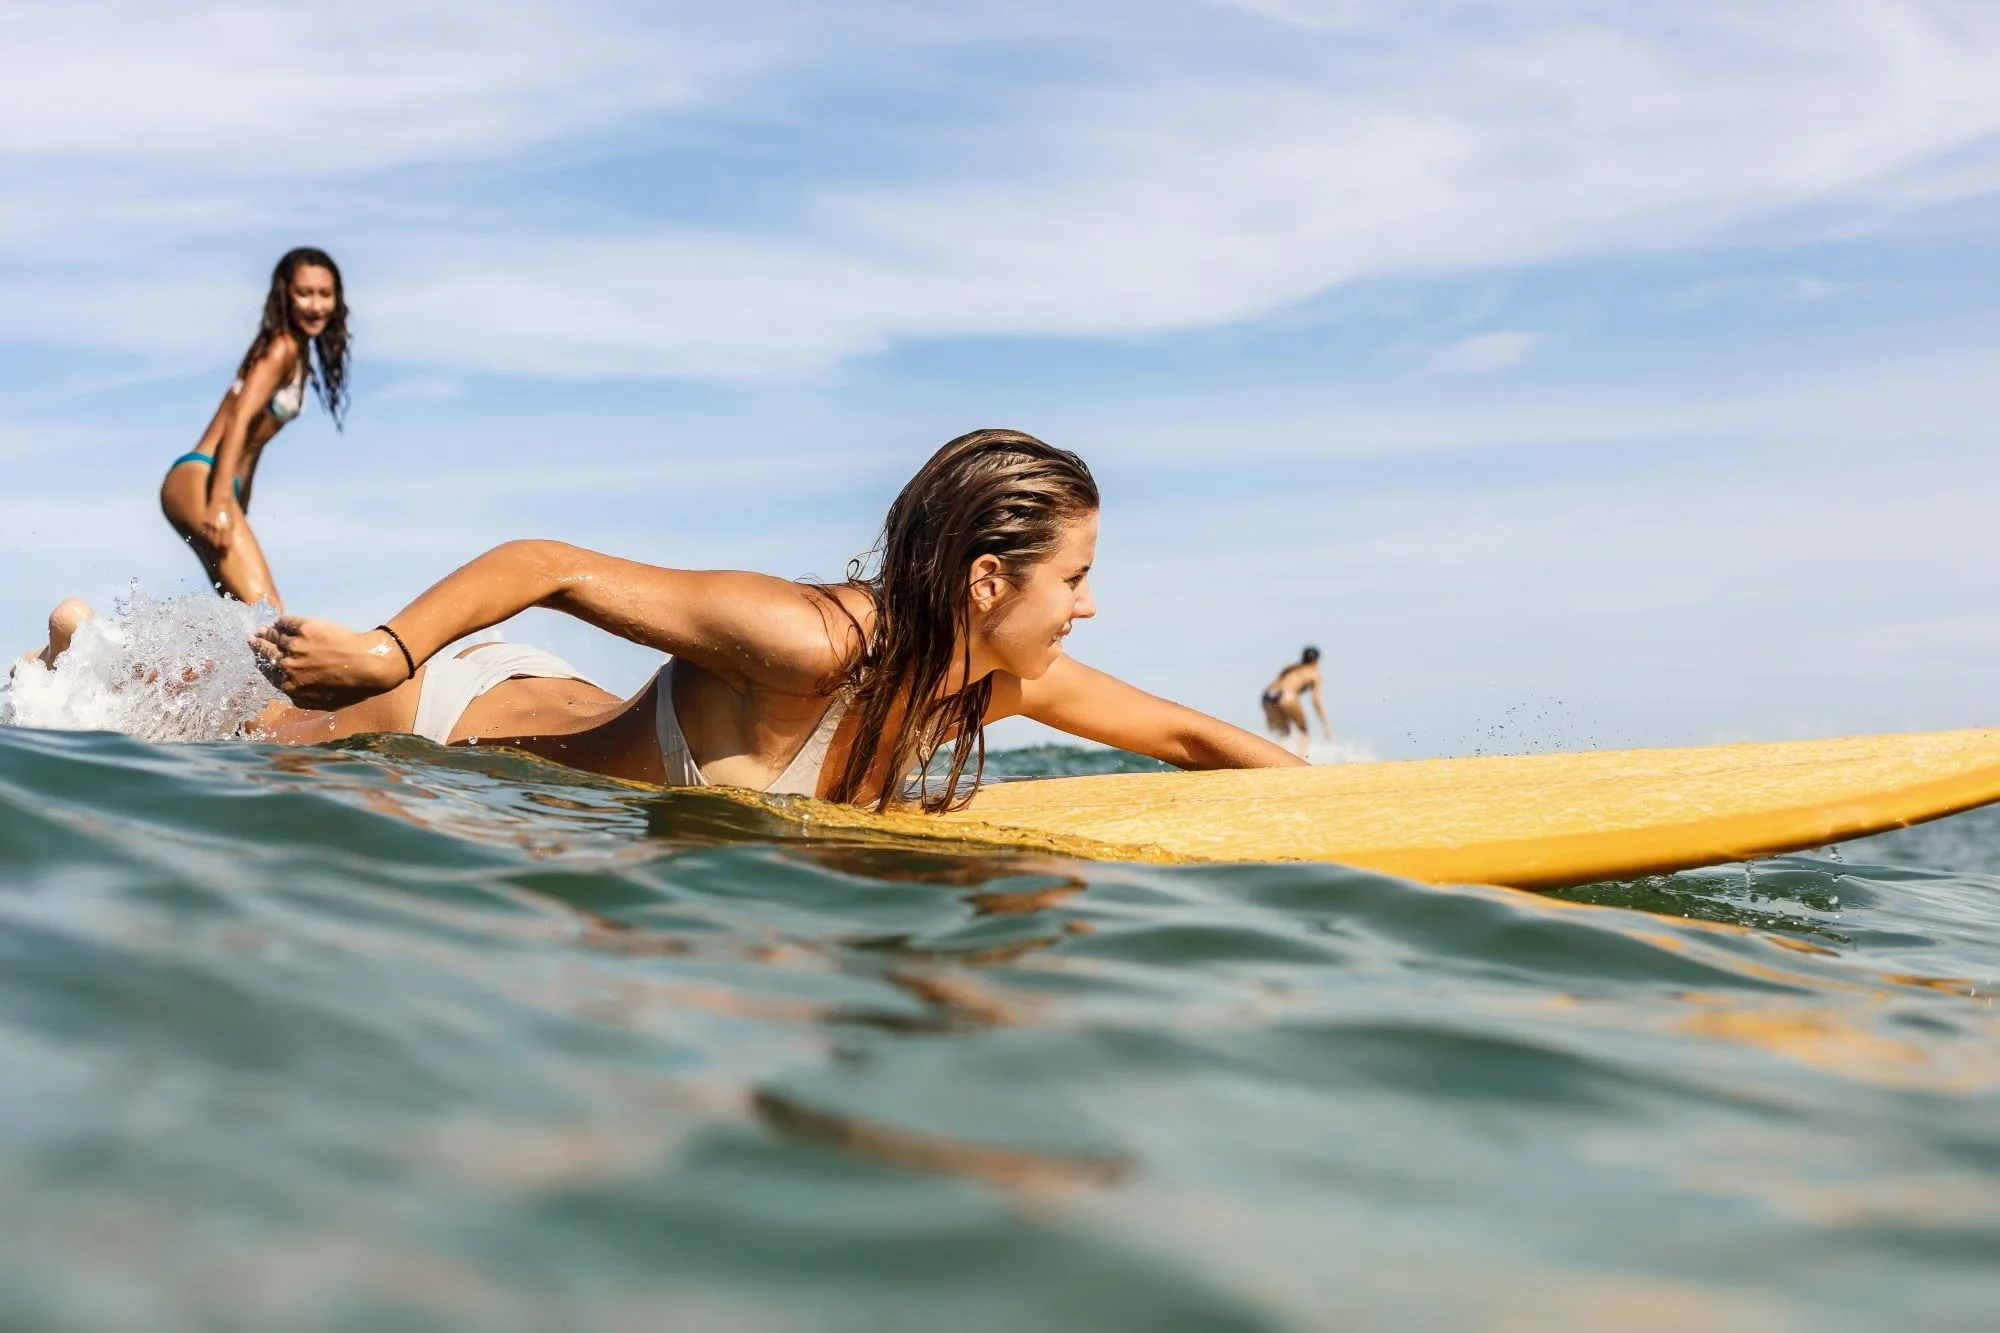 why you should go surfing, young women with long brown hair paddling on her yellow surfboard